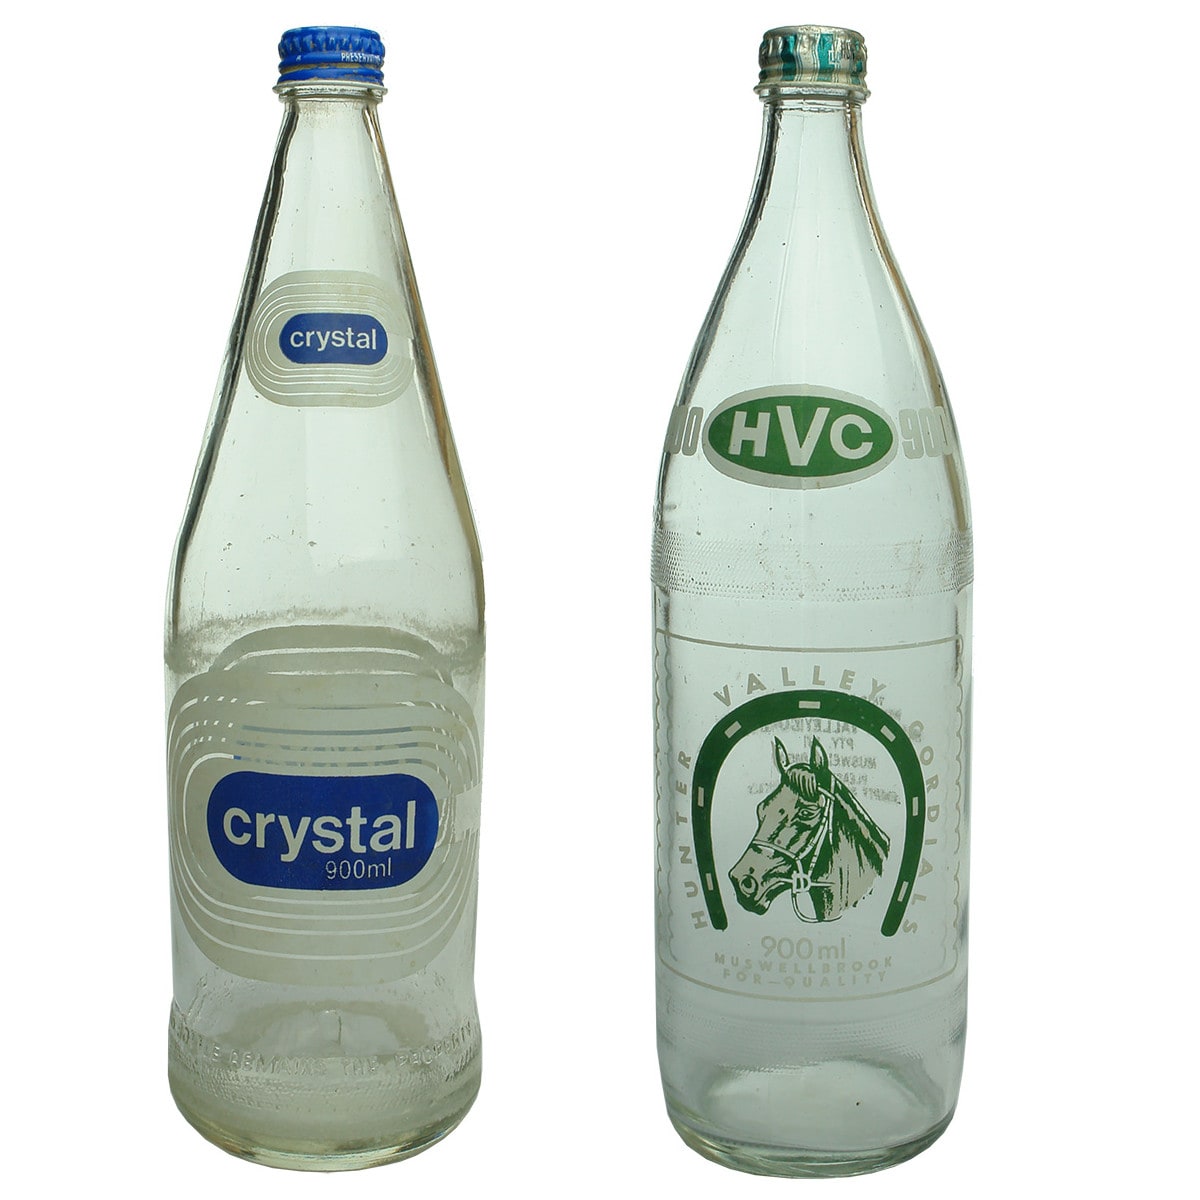 2 Screw top Ceramic Labels. Crystal. Telsco Bottle Co. Associated Home Delivery Pty Ltd Melbourne; Hunter Valley Cordials Muswellbrook. (Victoria & New South Wales)